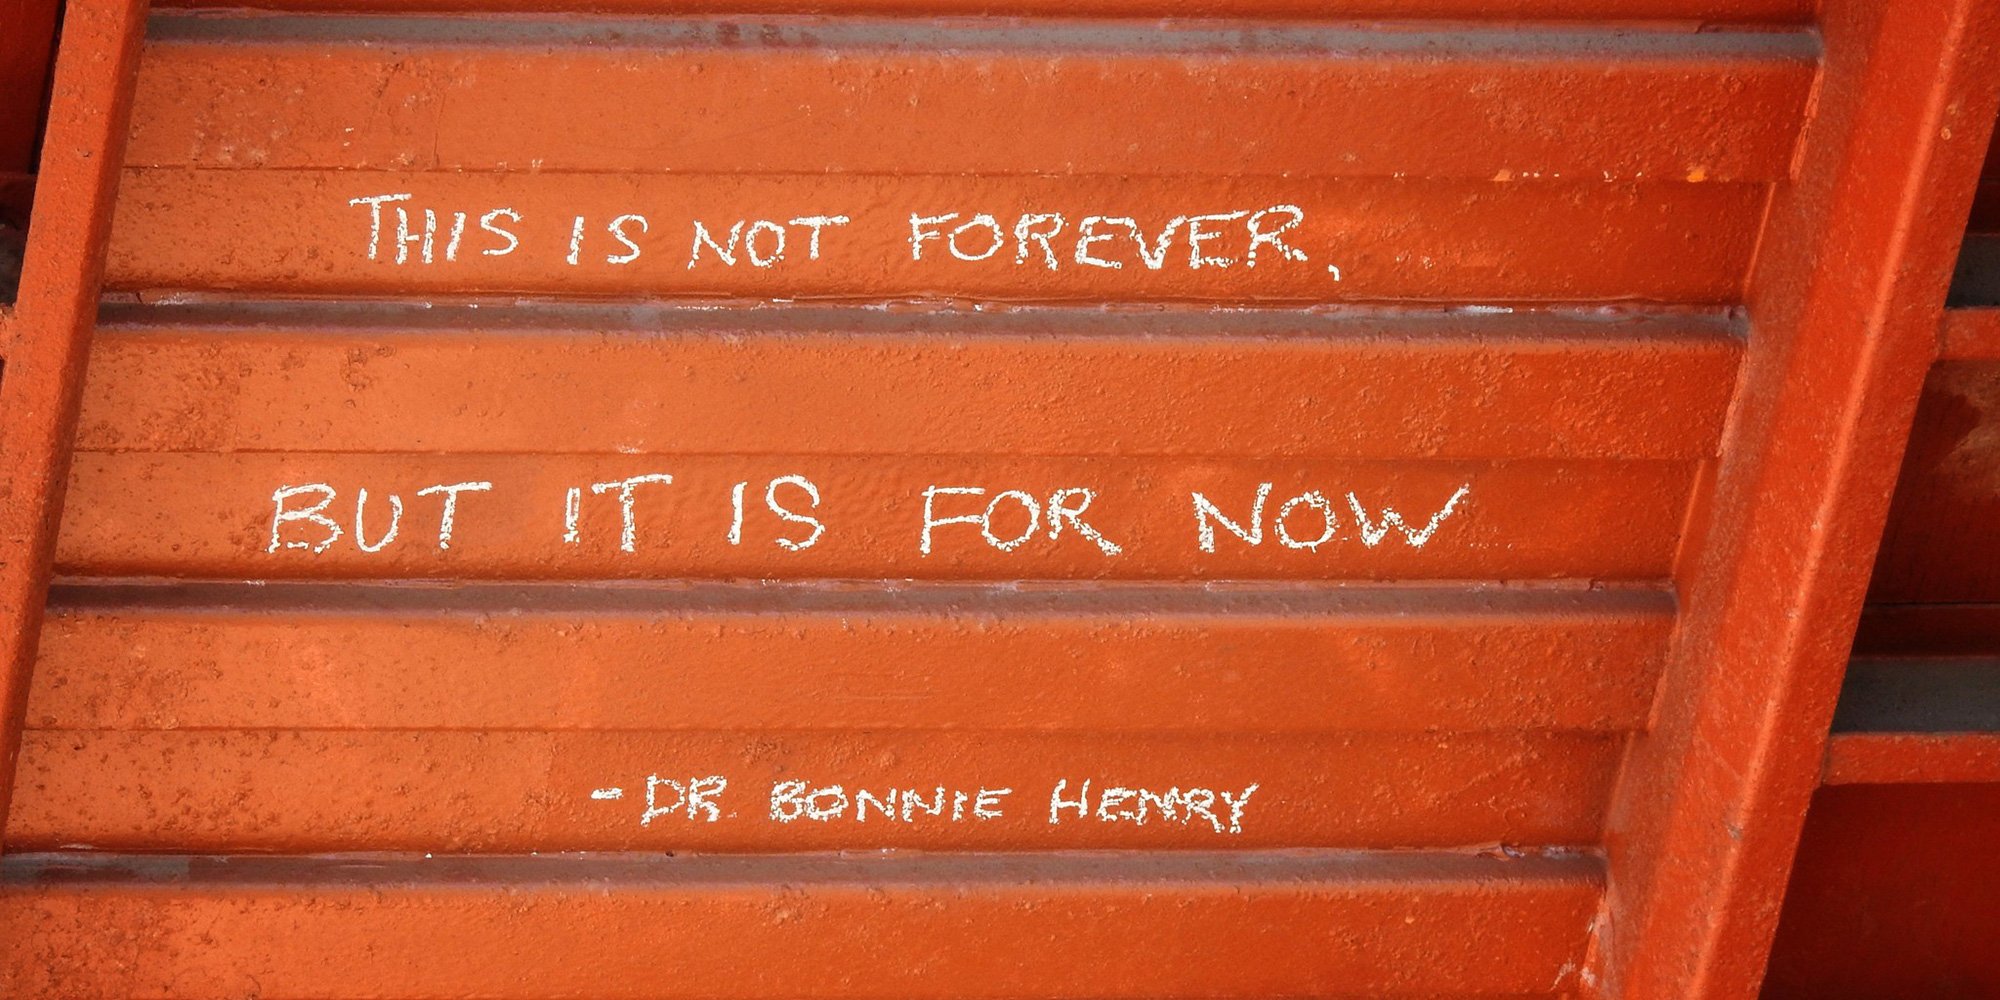 quote by Dr. Bonnie Henry